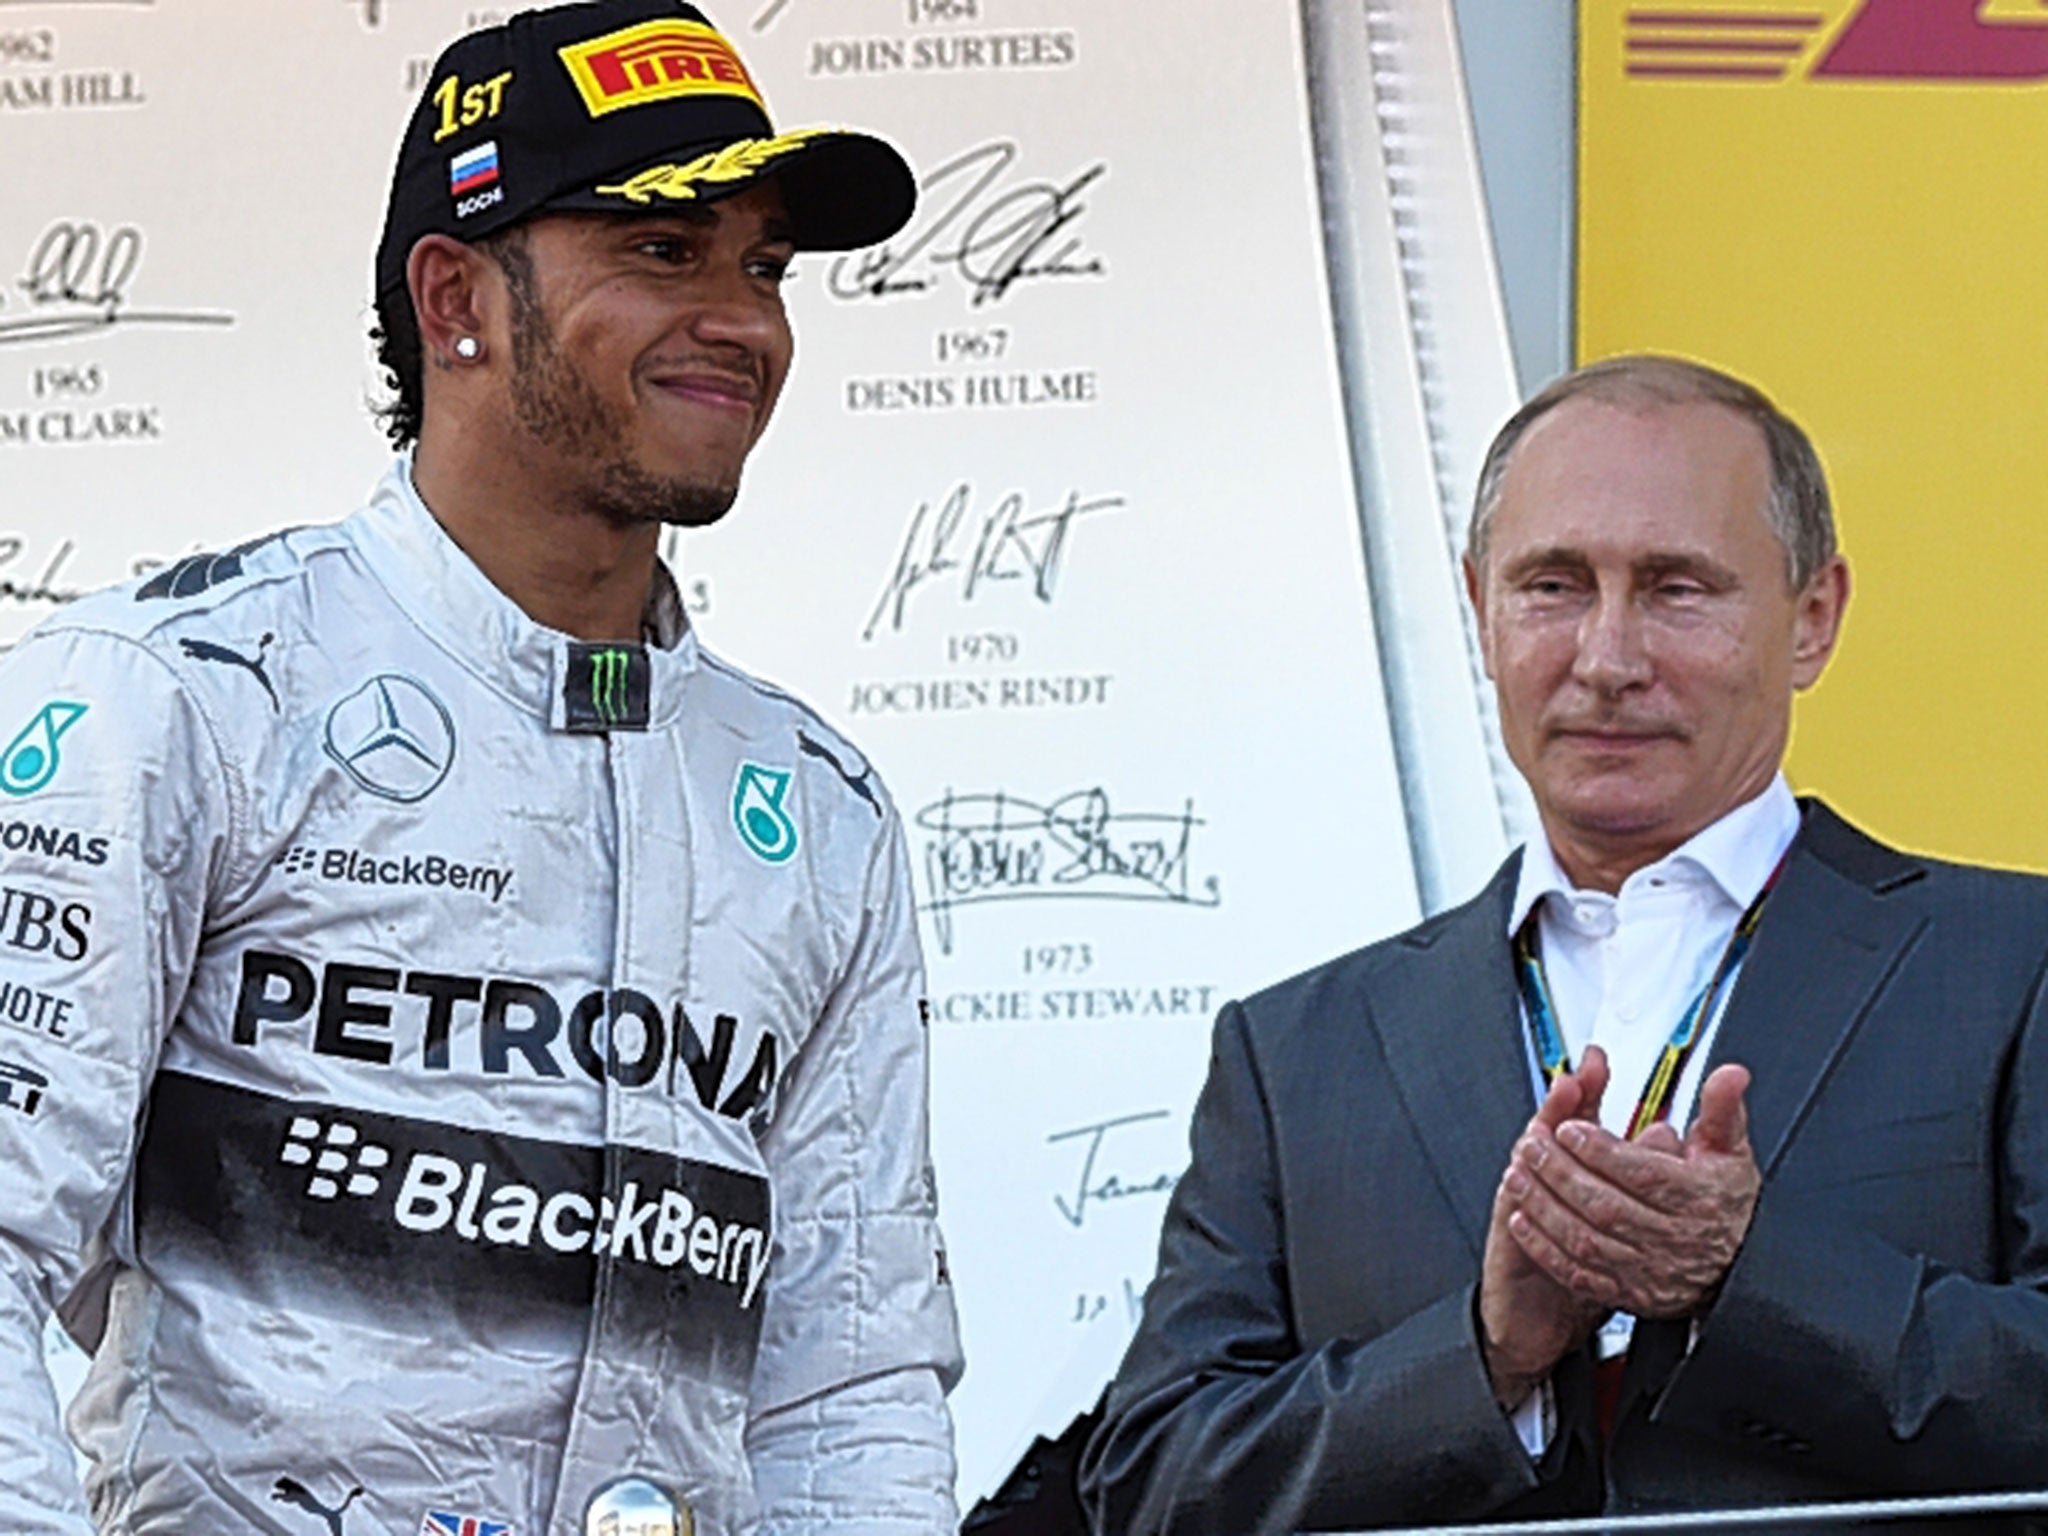 The Formula One title leader Lewis Hamilton is applauded by President Vladimir Putin at the inaugural Russian GP this month